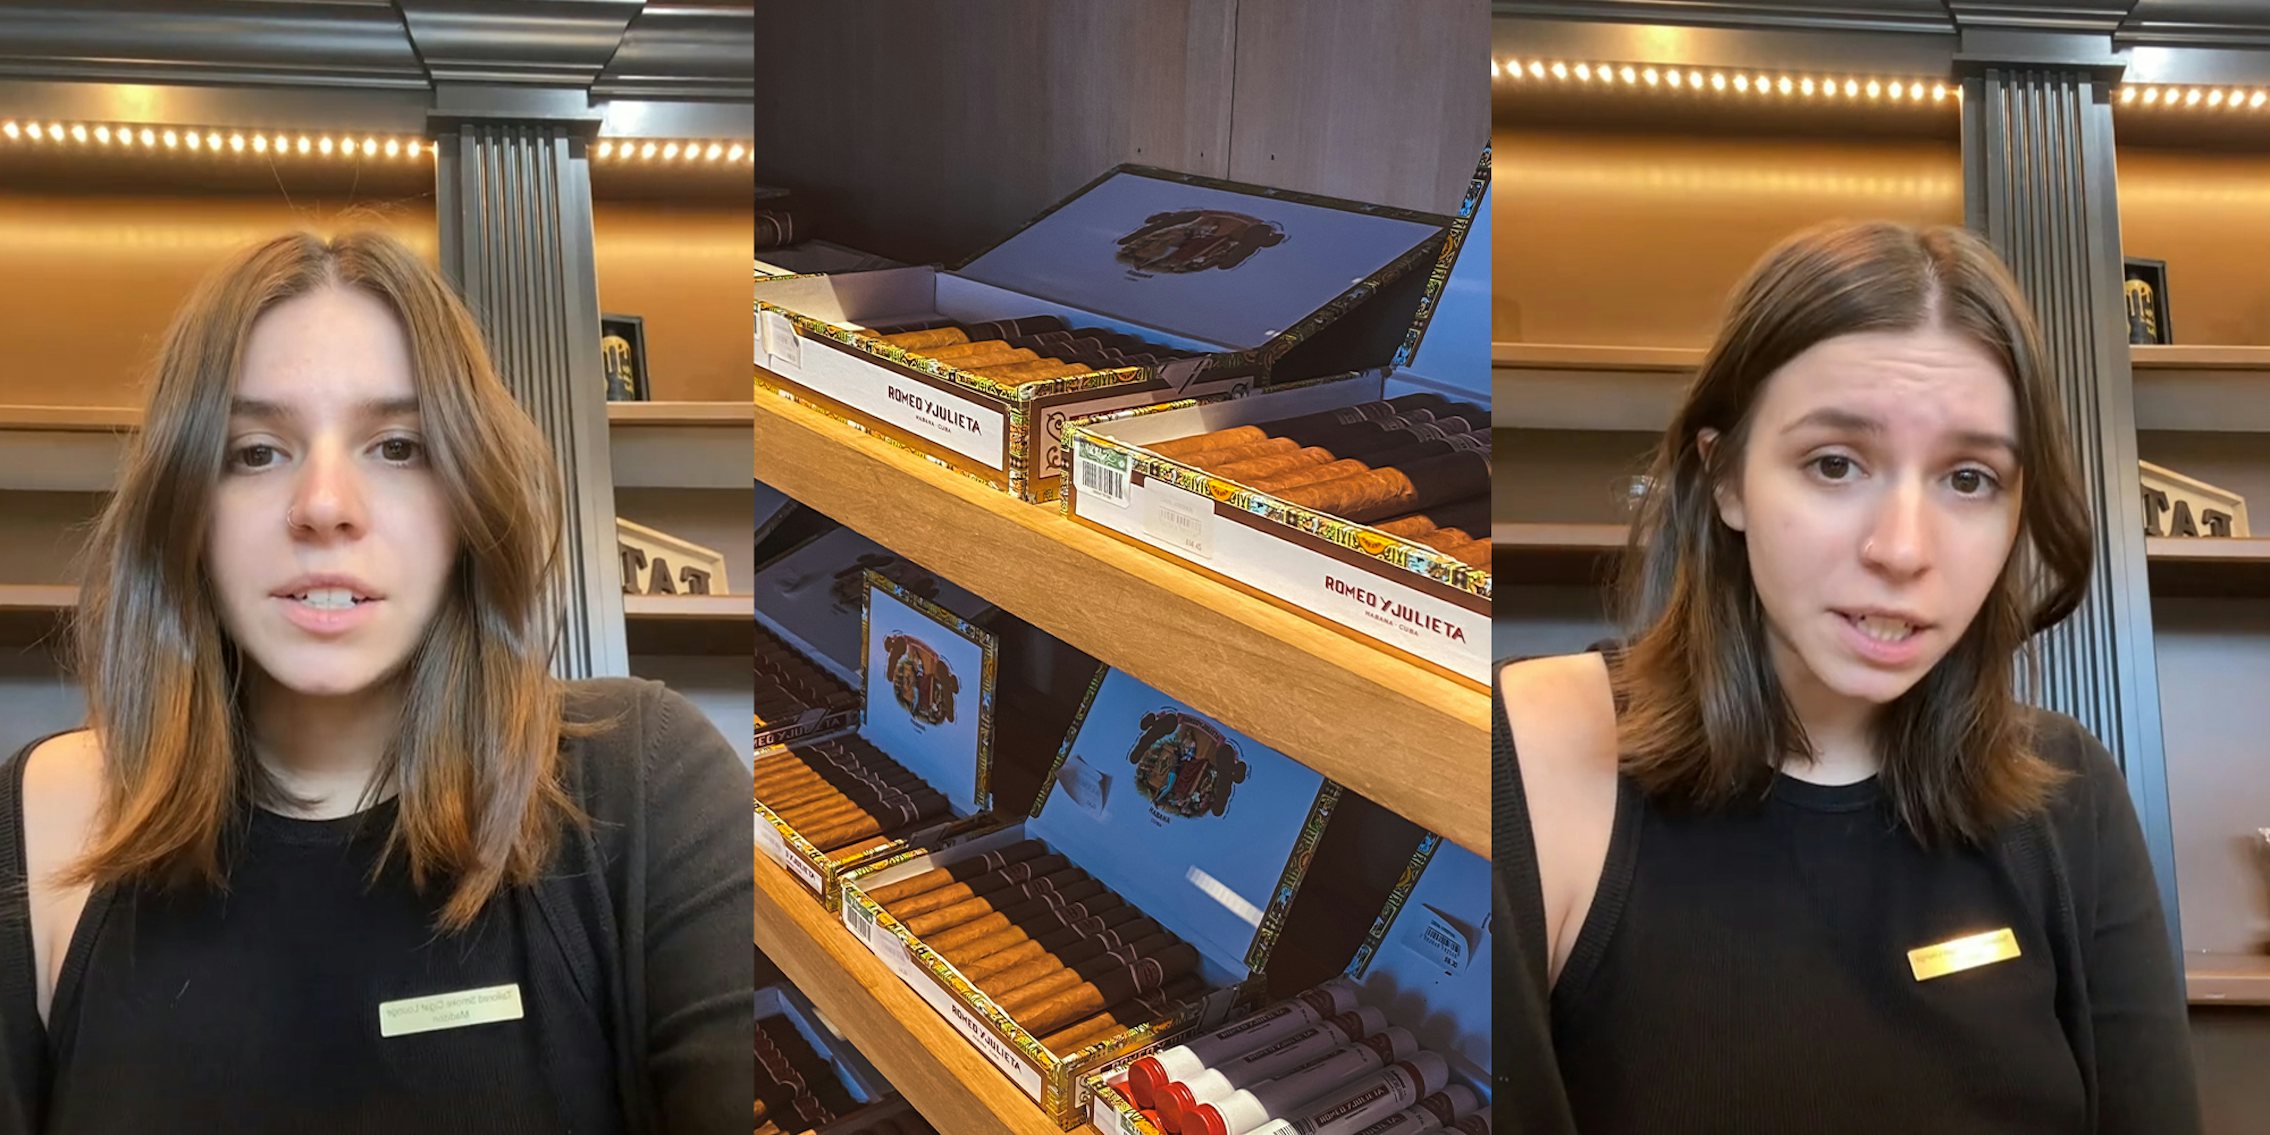 Psychology masters student says she makes more money working cigar store